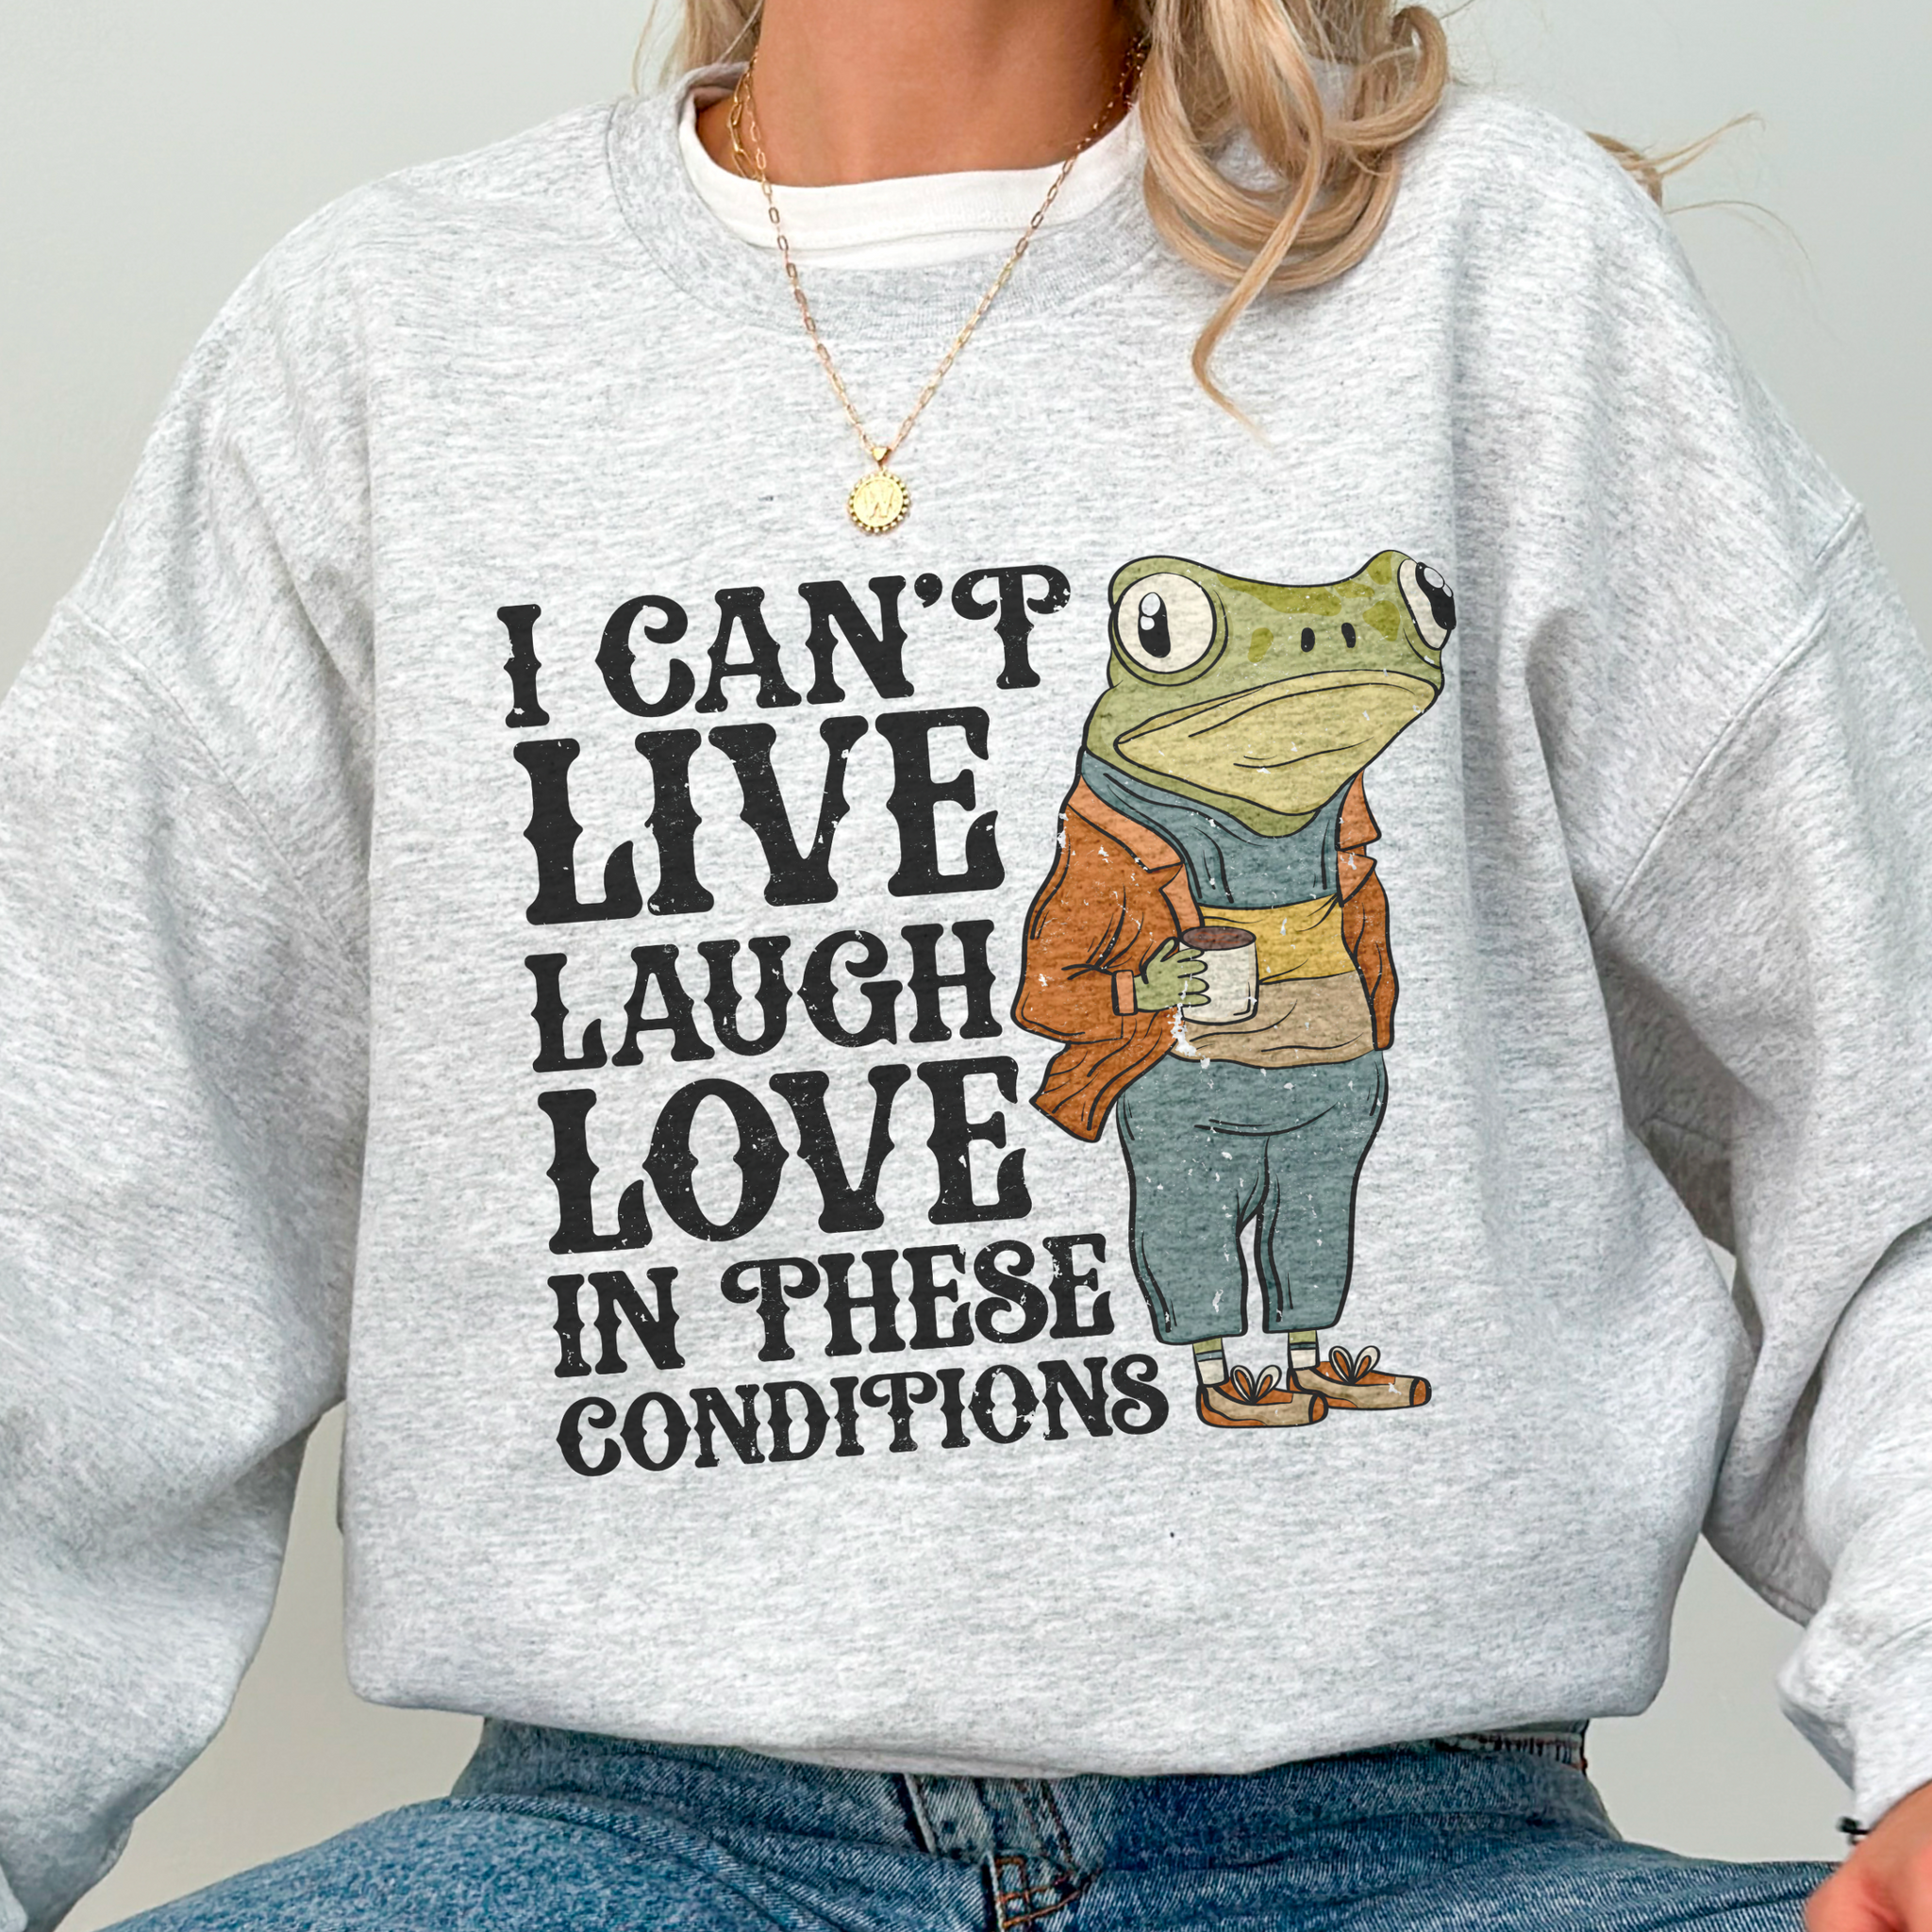 I Can't Live, Laugh, Love in These Conditions Crewneck Sweatshirt